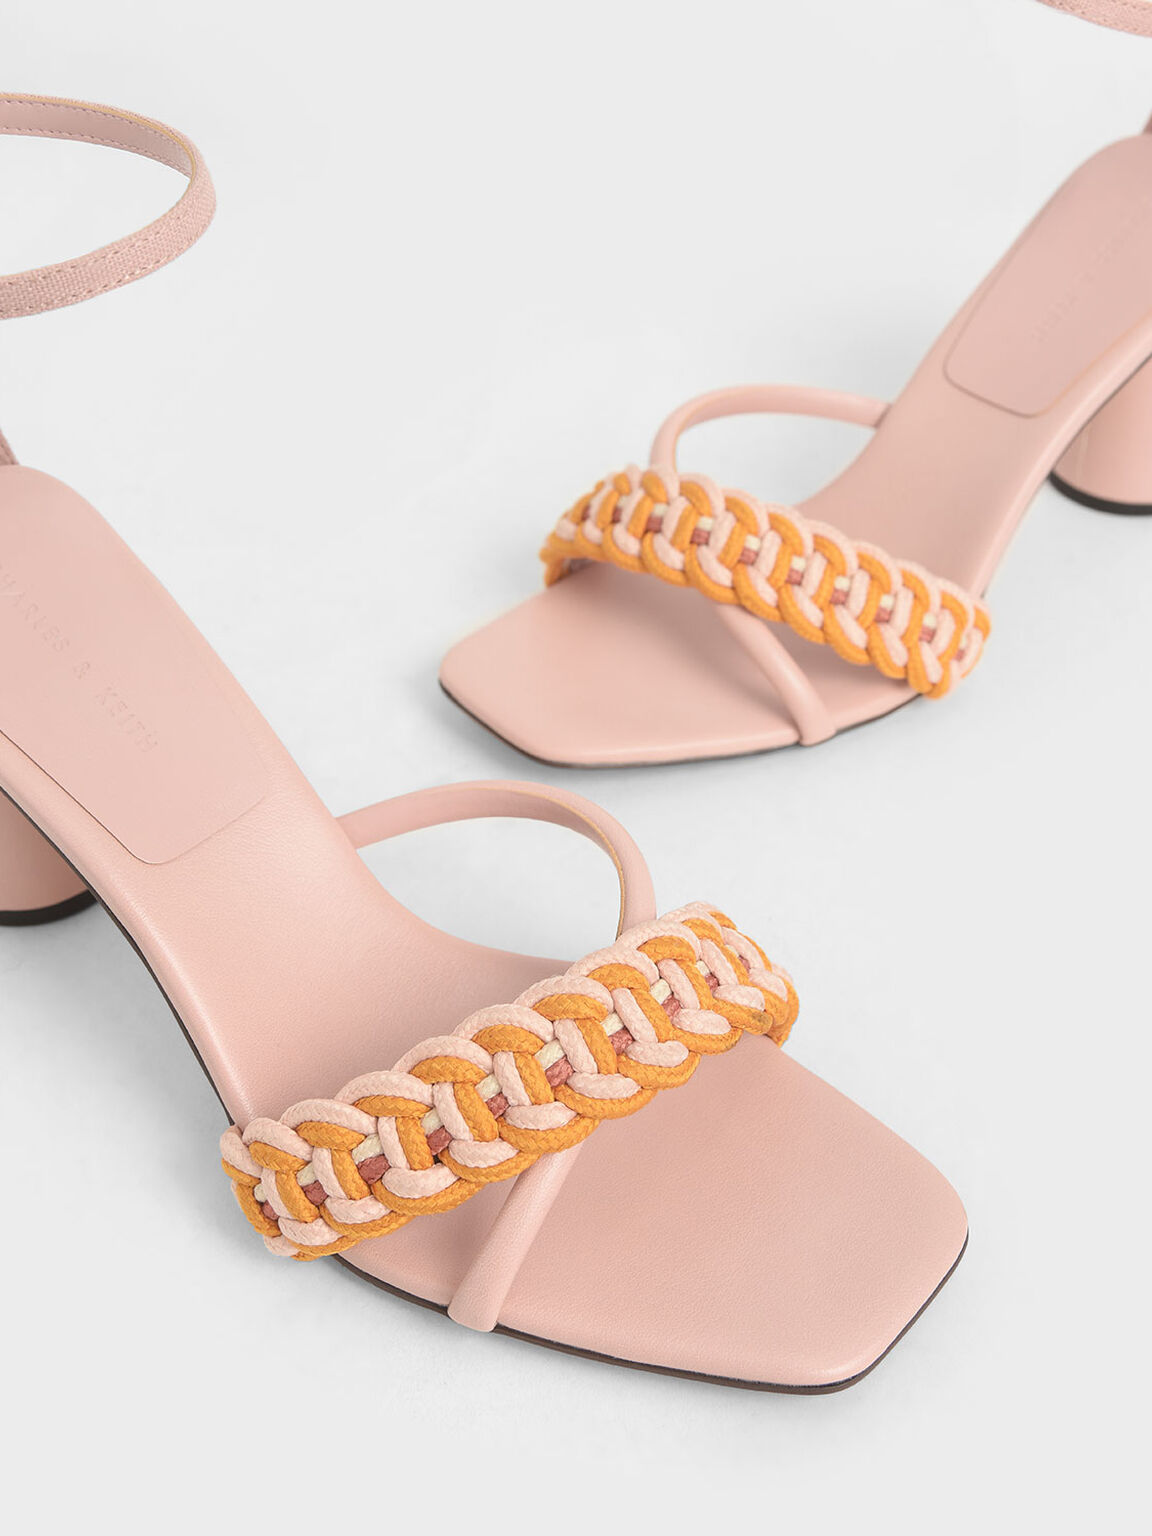 Rope Cylindrical Heeled Sandals, Nude, hi-res